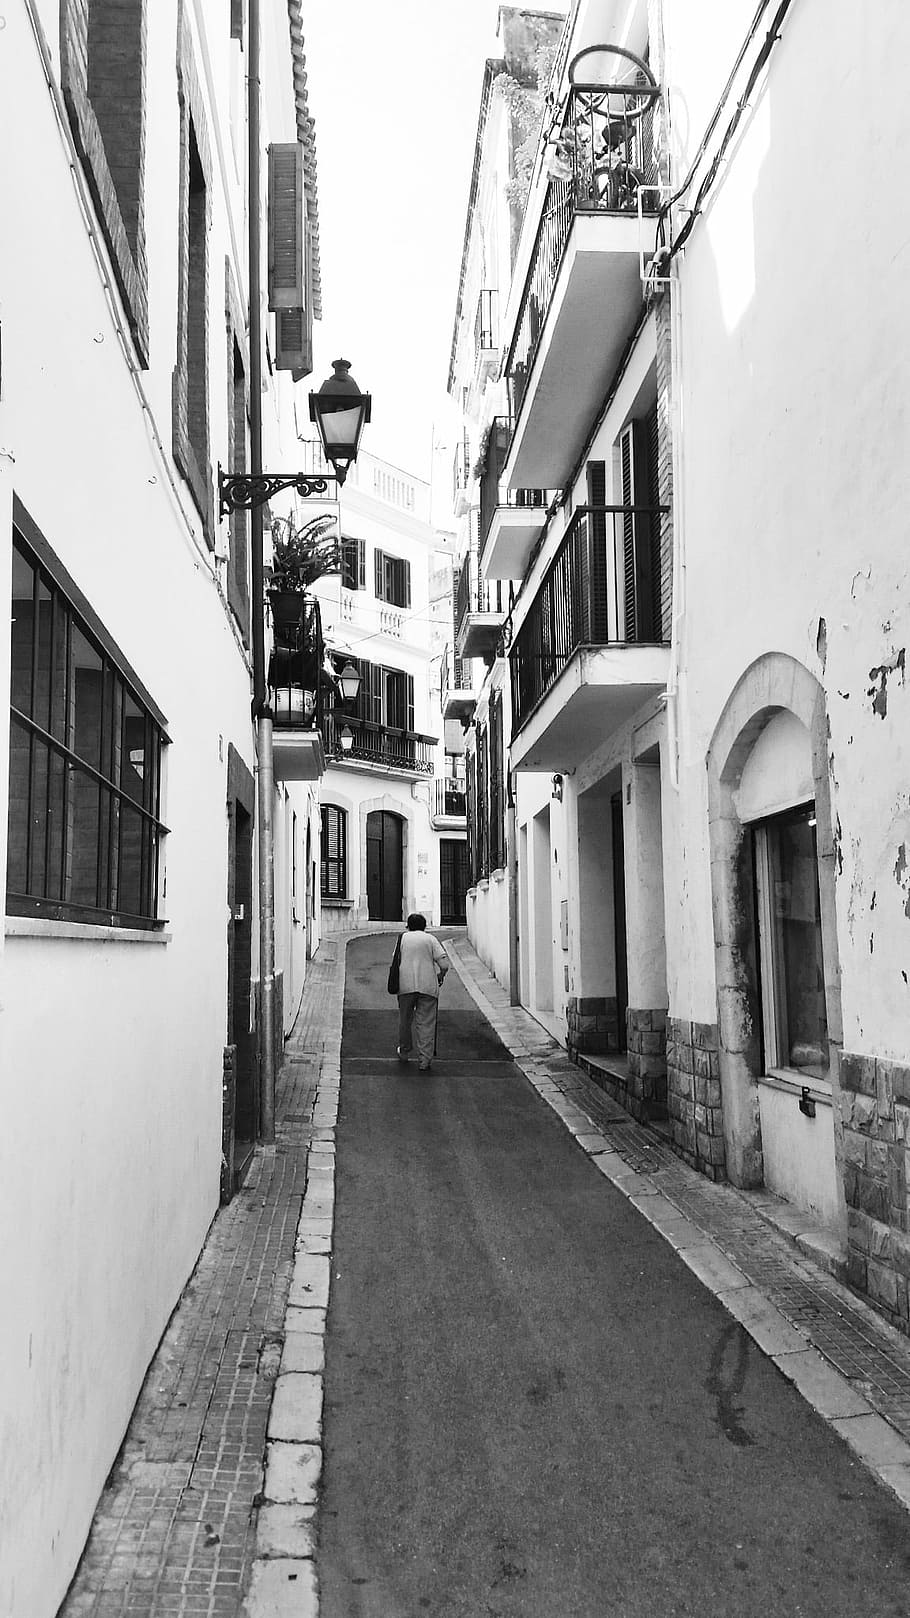 spain, sitges, street, house, narrow, architecture, window, door, outside, white house